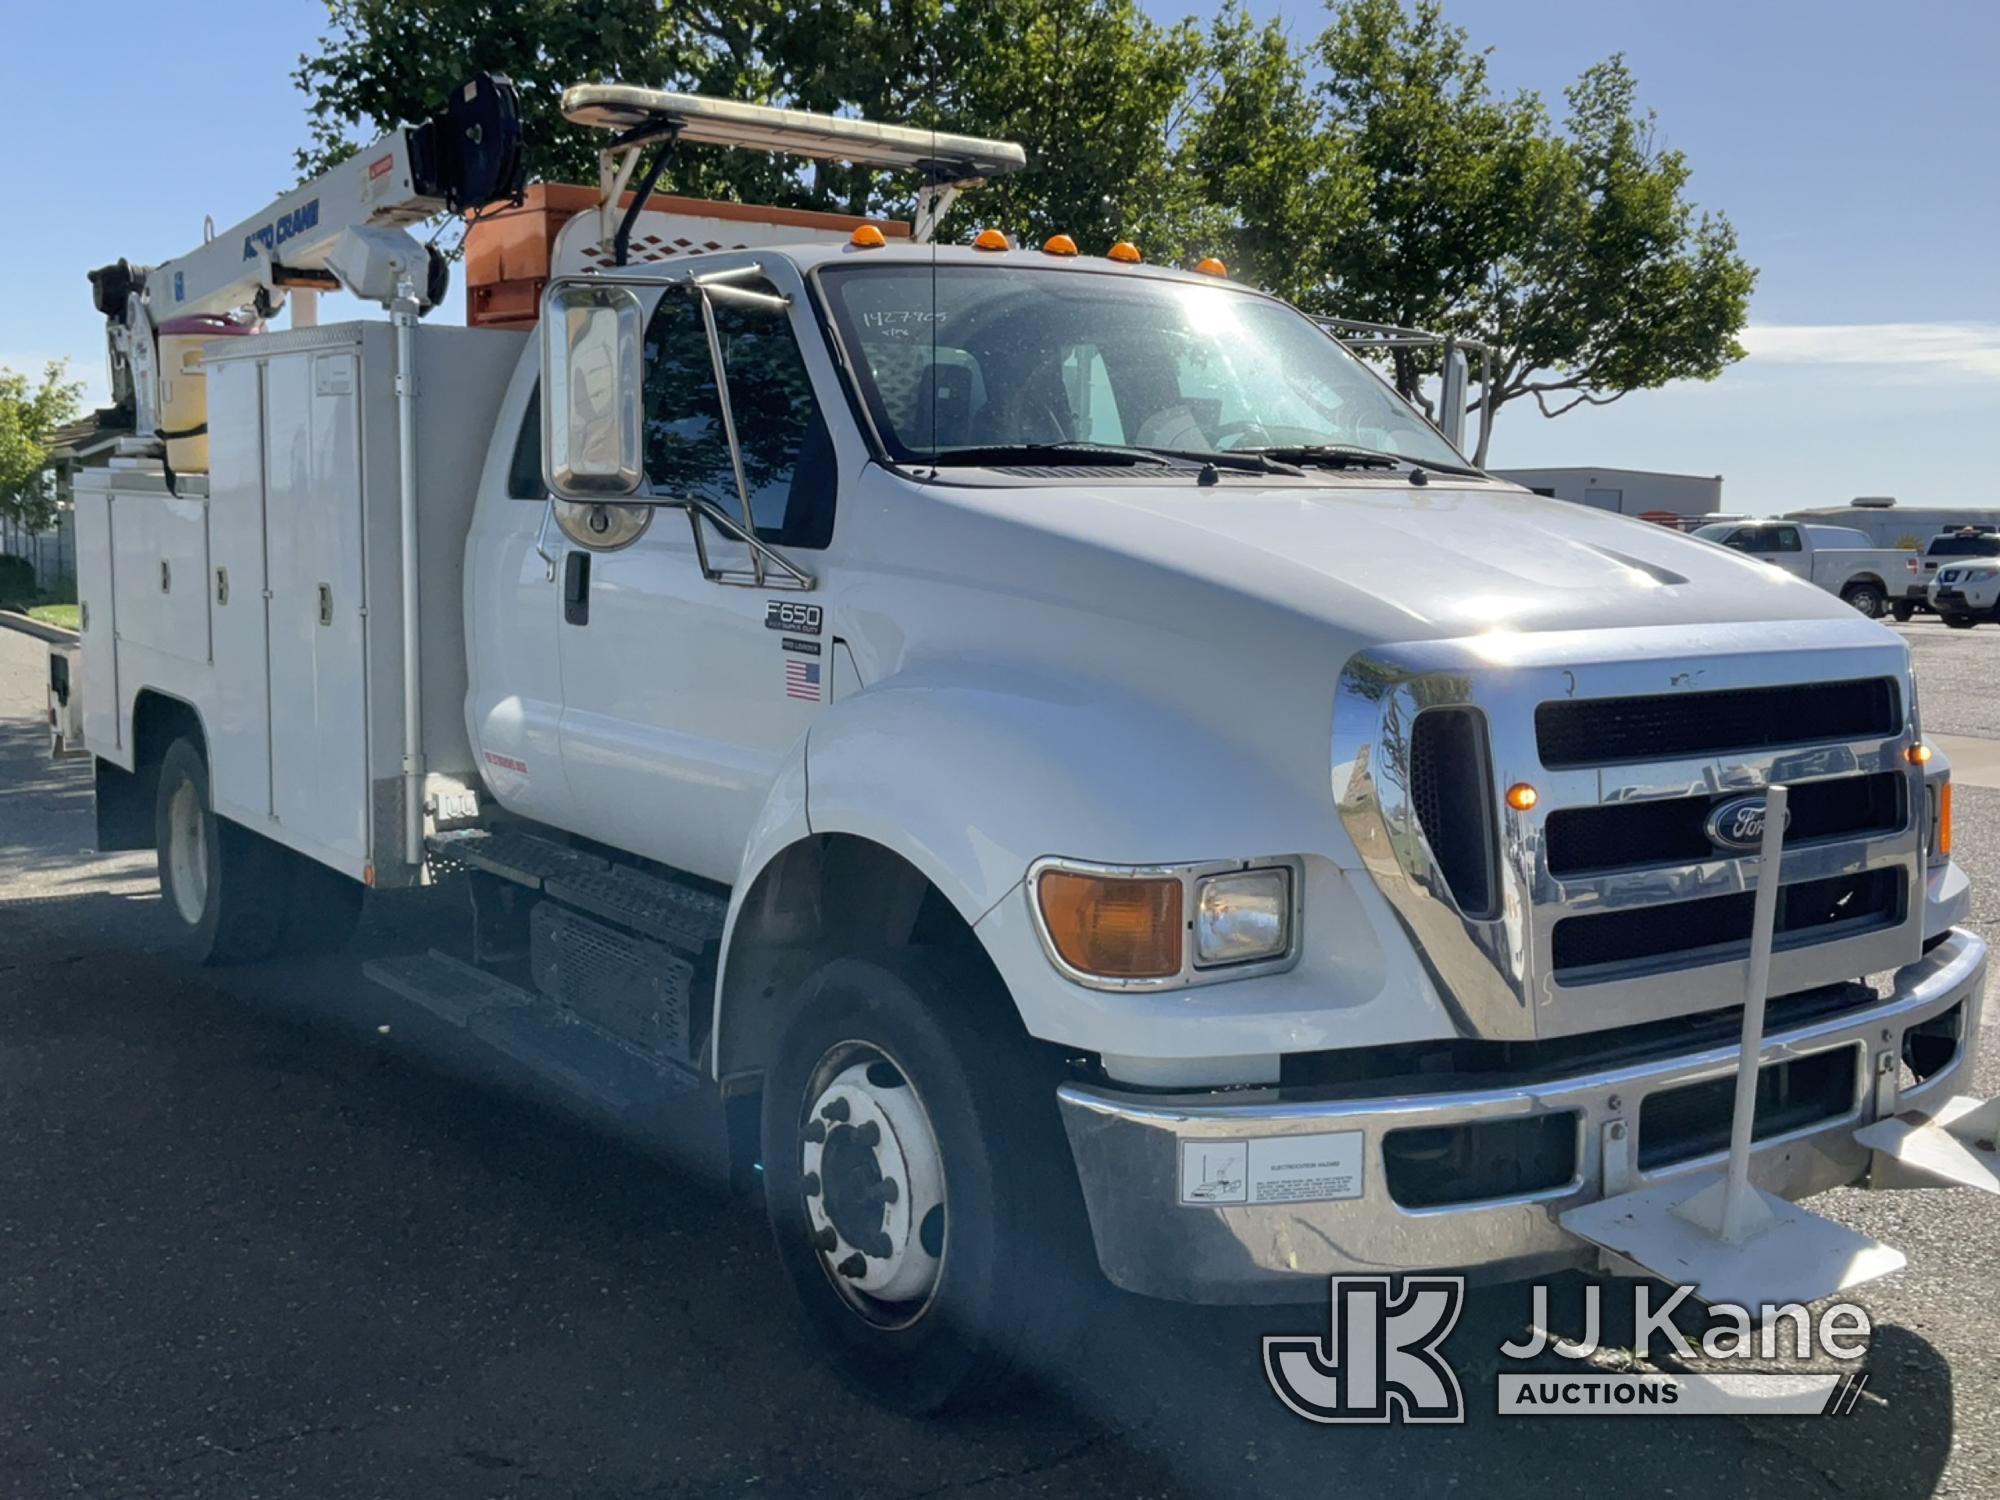 (Dixon, CA) 2011 Ford F650 Utility Truck Runs & Moves, Unit Operation Unknown, Could Not Get Hydraul